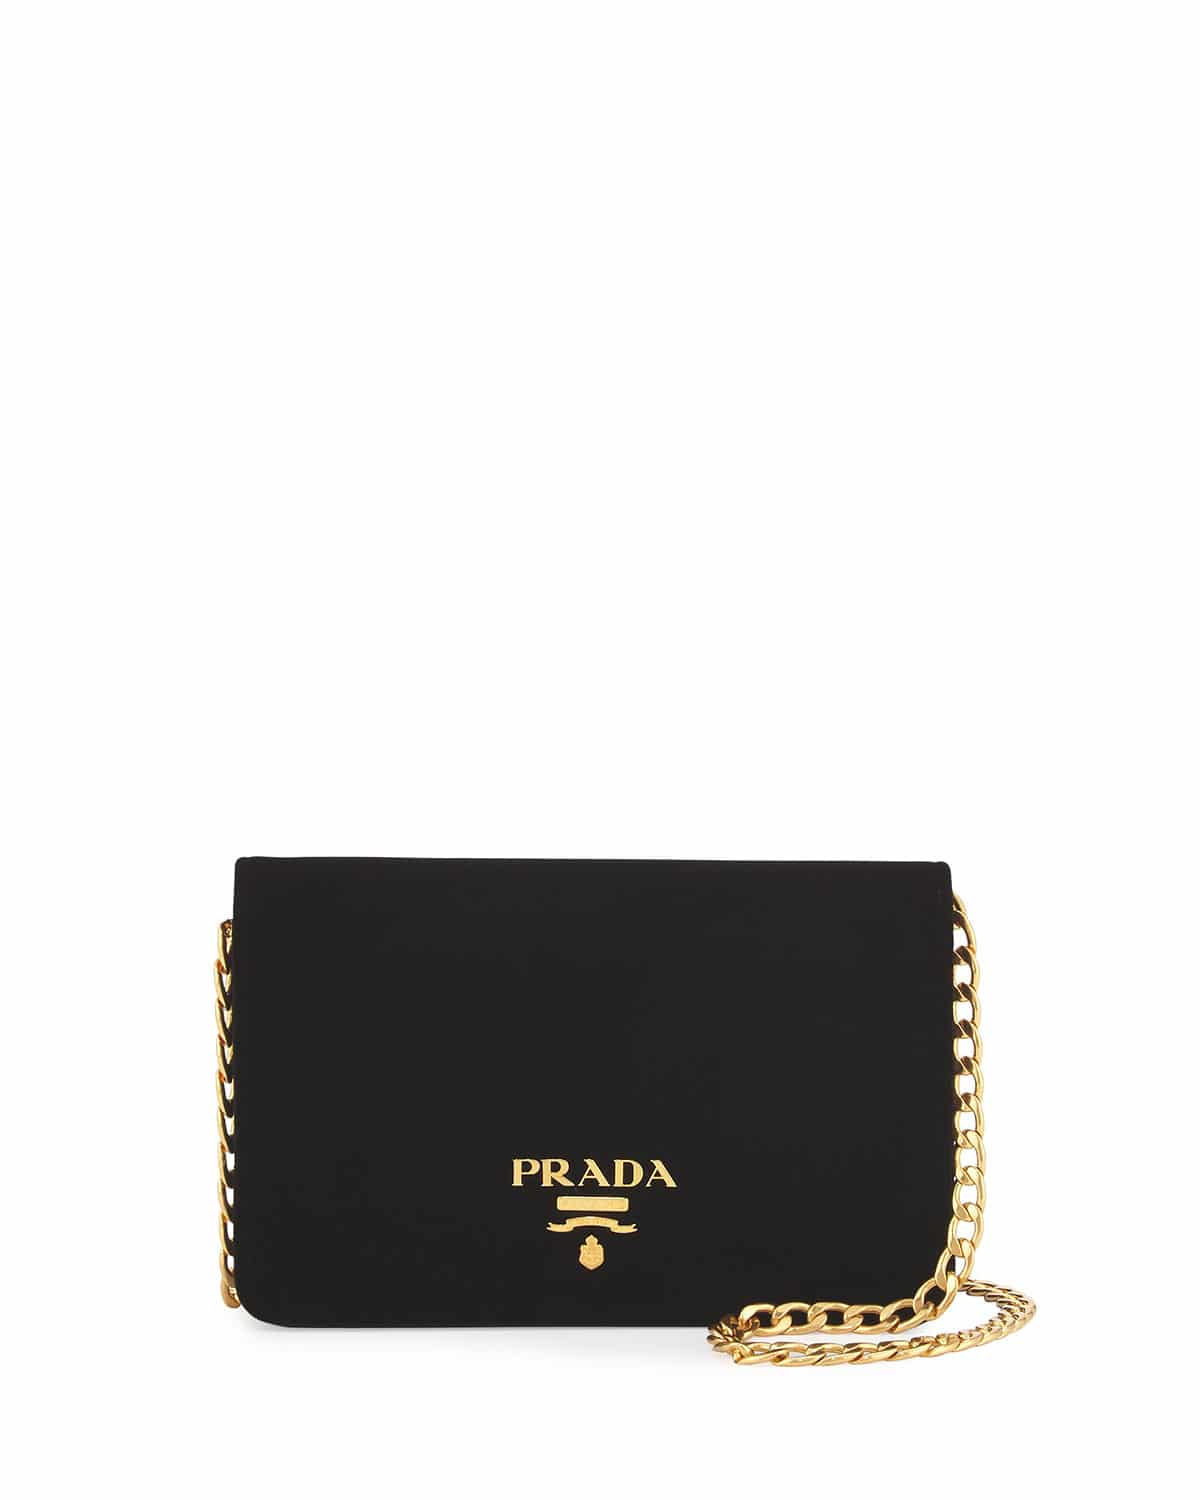 Prada Fall/Winter 2016 Bag Collection - Spotted Fashion